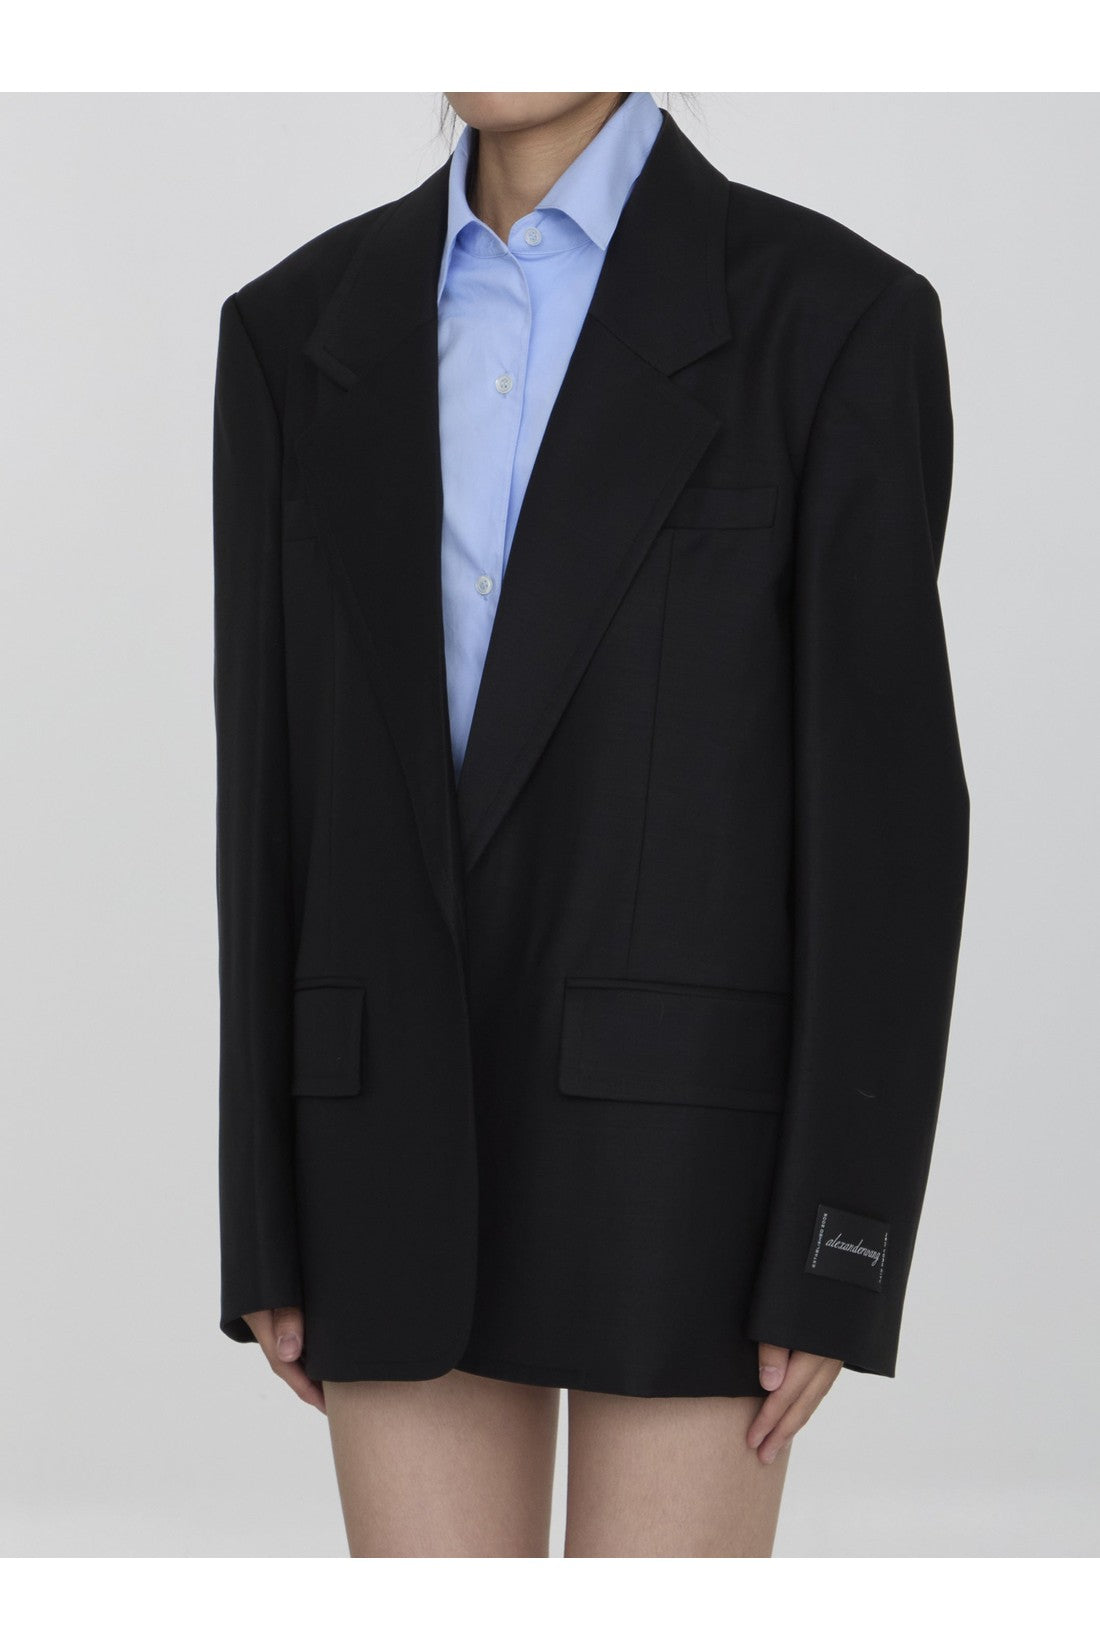 Pre-styled oversize jacket with dickie